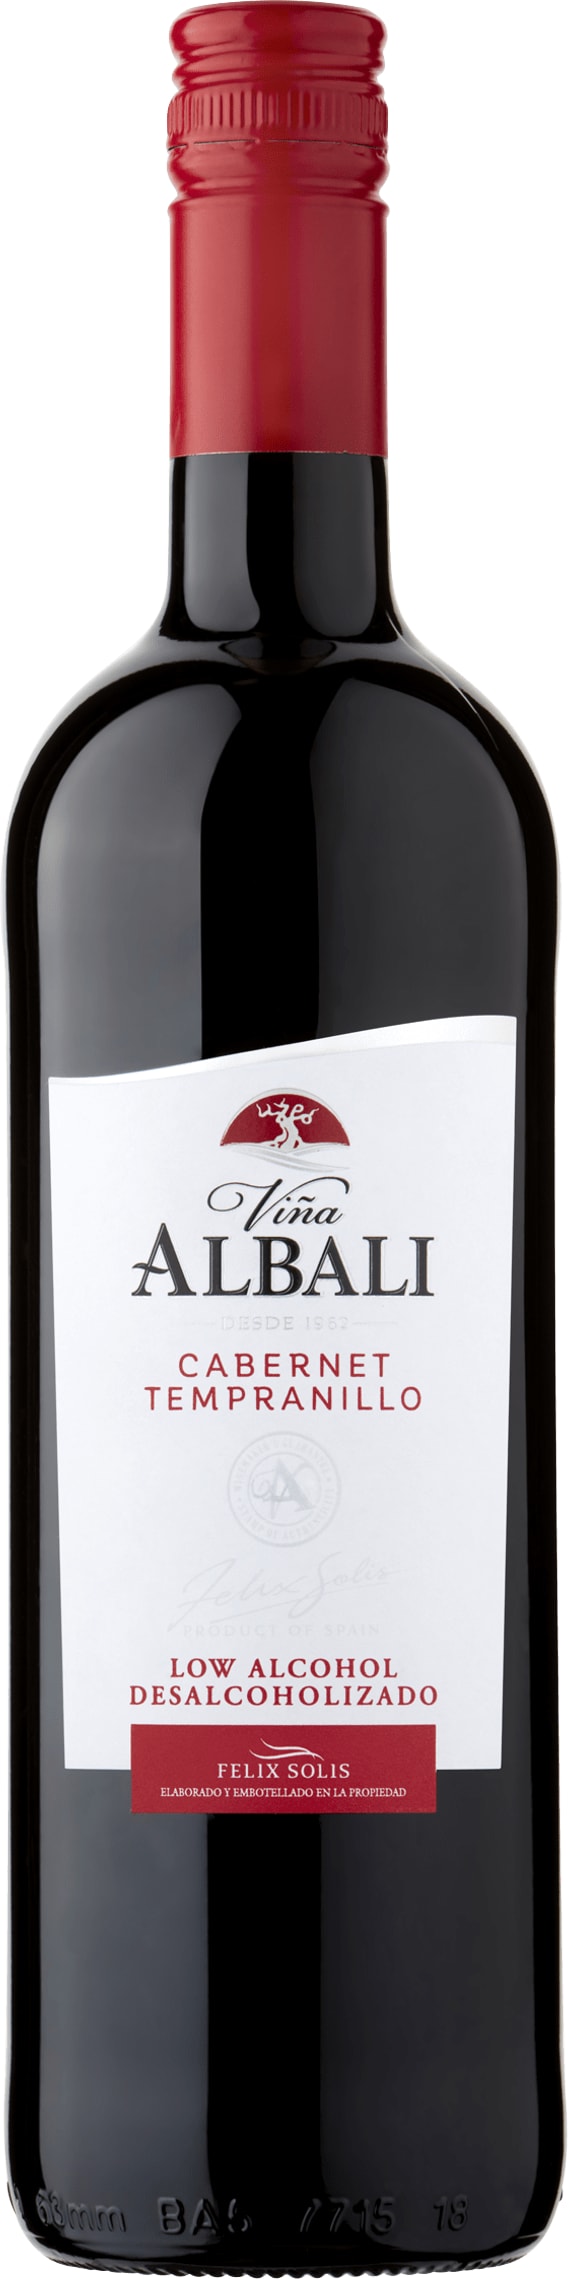 Albali Cabernet Sauvignon Tempranillo Low Alcohol 2019 75cl - Buy Albali Wines from GREAT WINES DIRECT wine shop